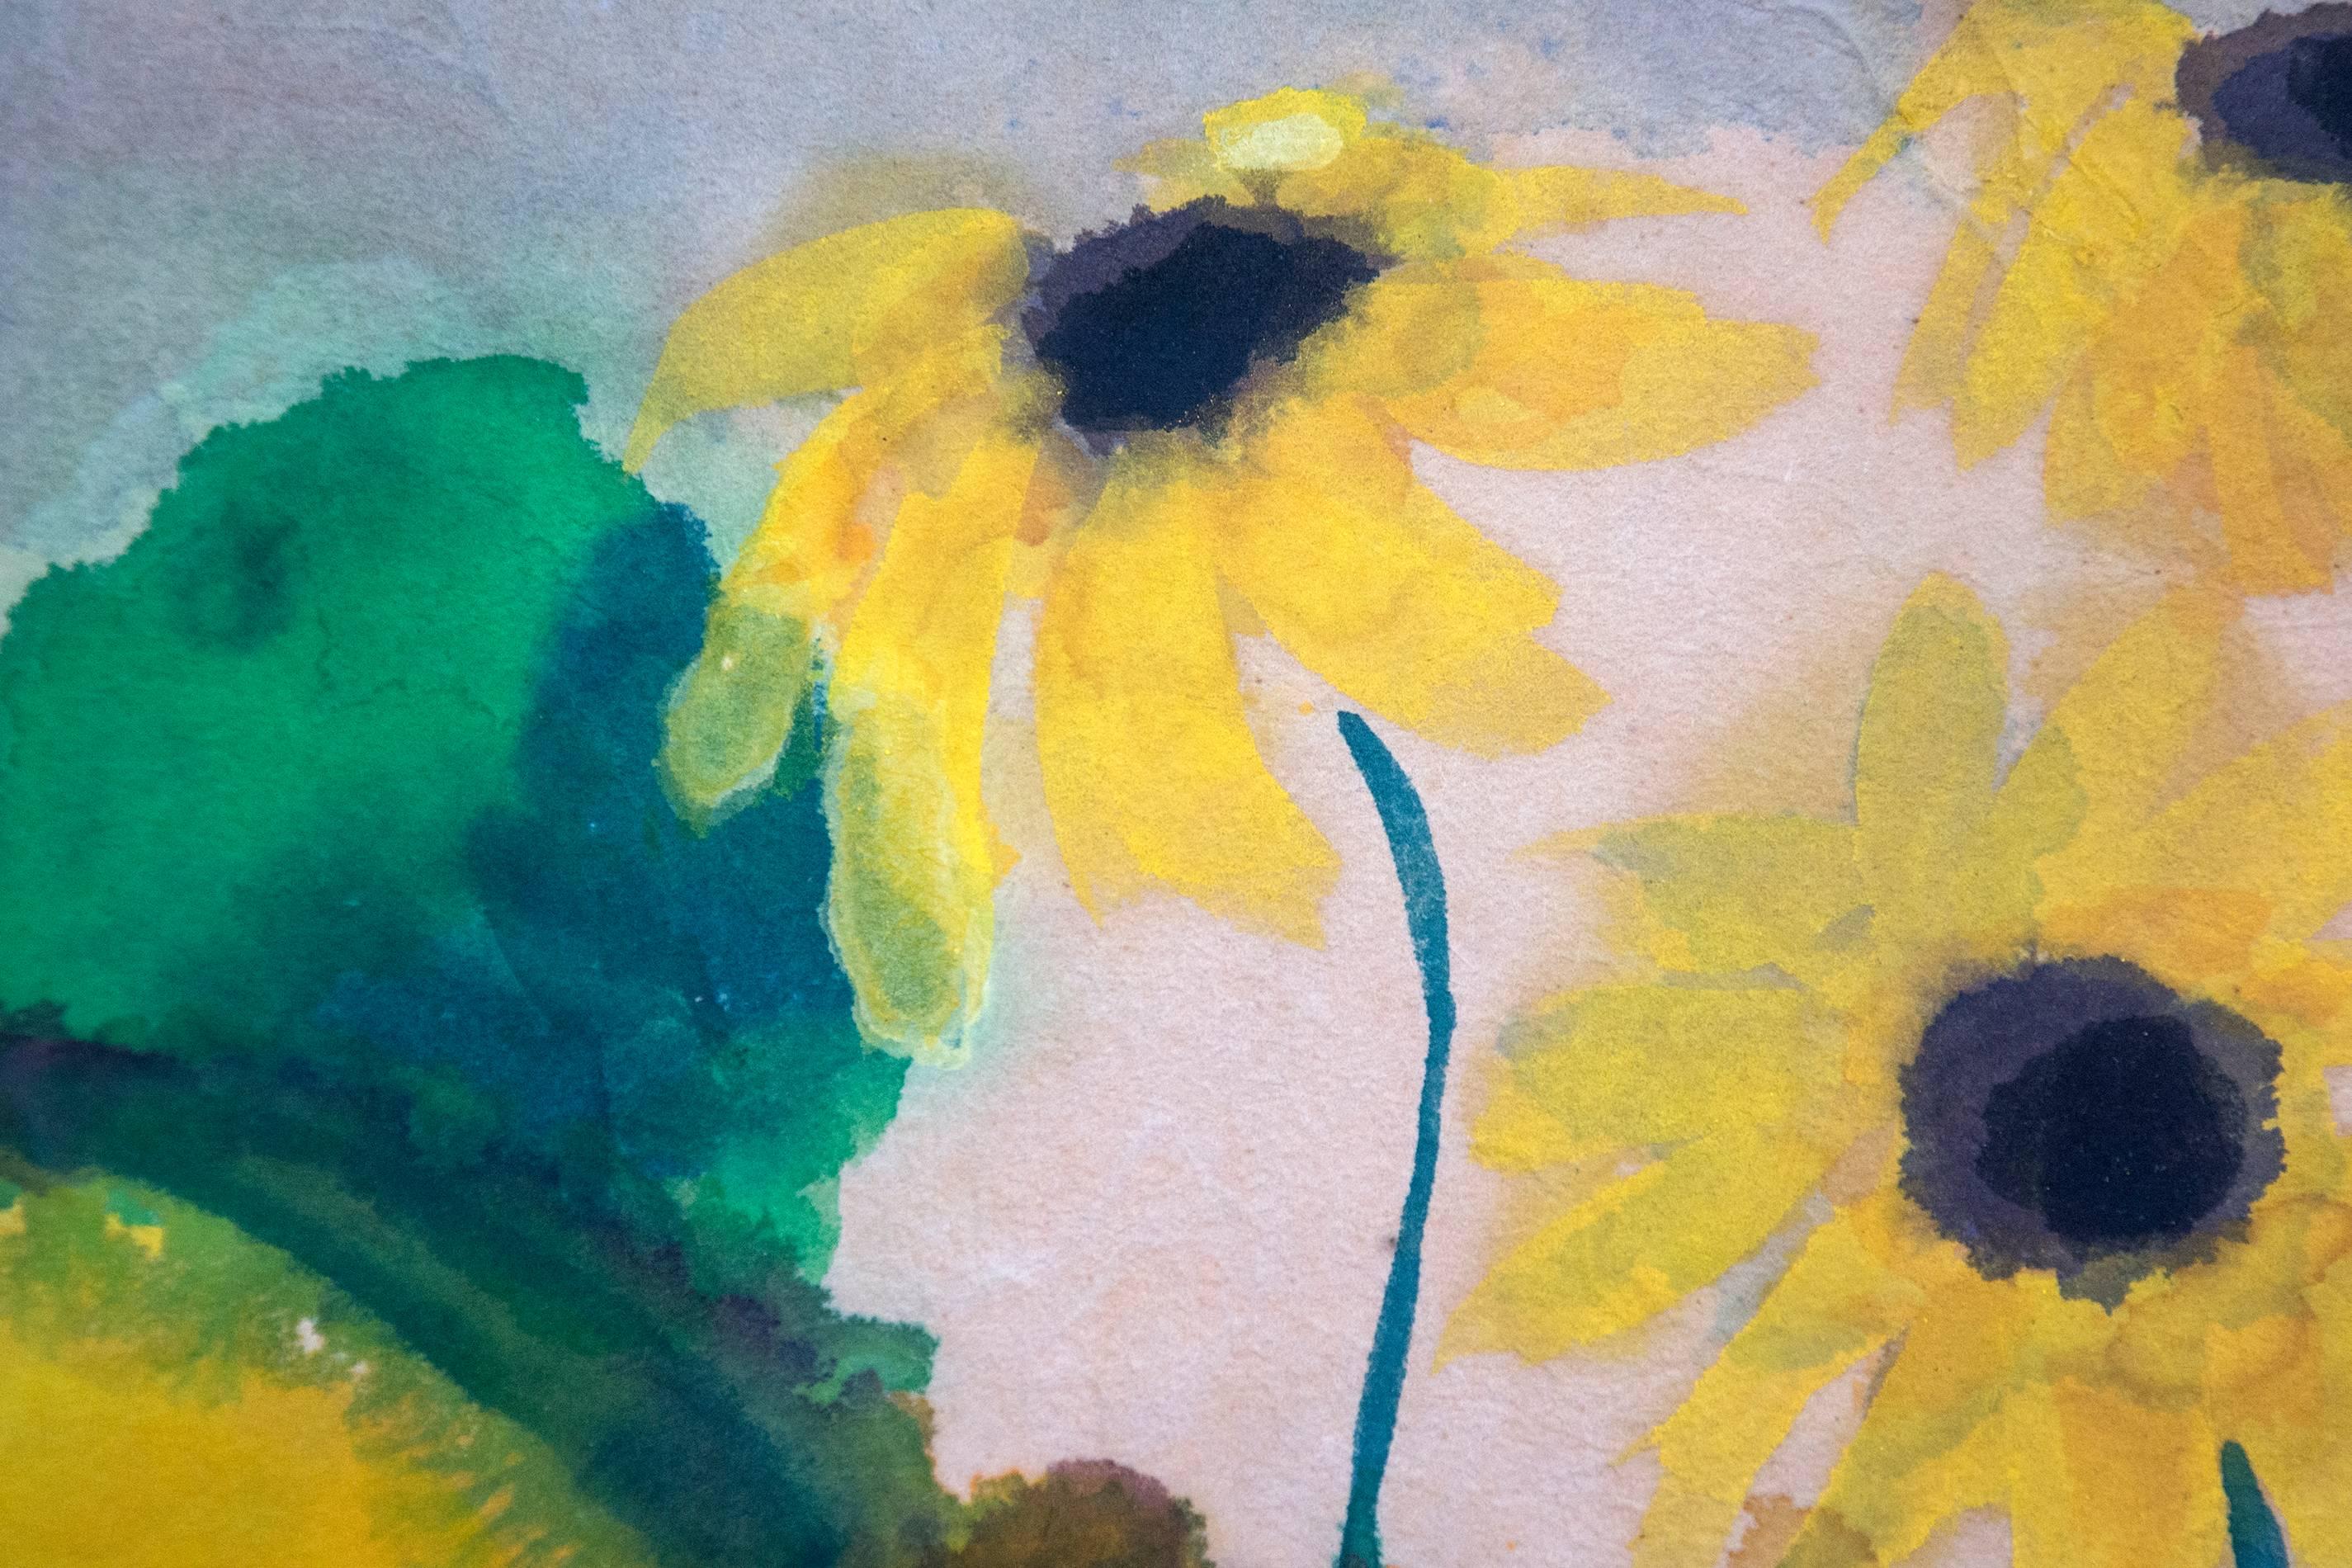 Watercolor on Japan Paper by Emil Nolde, one of the first Expressionists. Golden yellows and deep reds appear frequently in his work. His intense preoccupation with flowers reflected his obsession with Van Gogh. 

This work was created between 1925